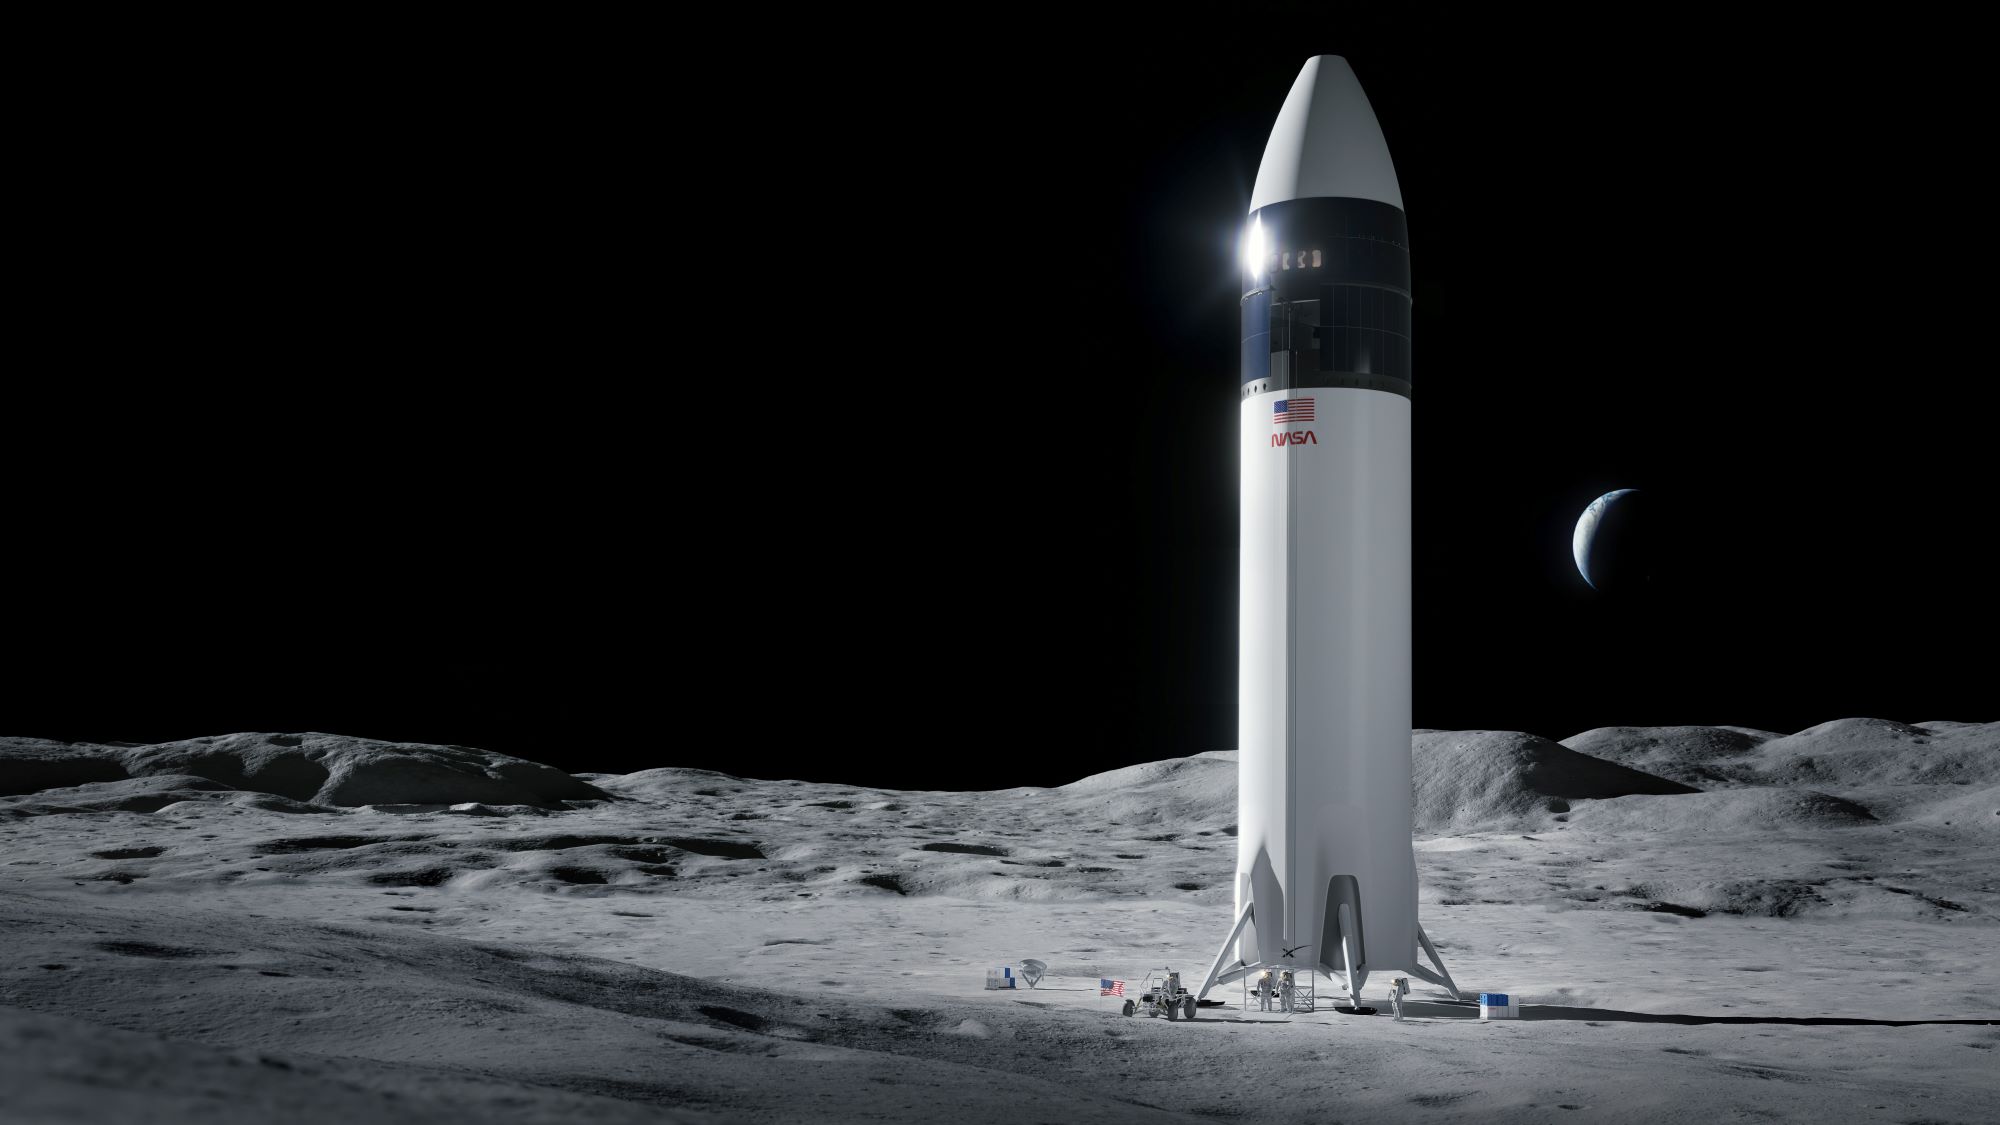 An illustration of a white Starship rocket on a gray lunar surface.